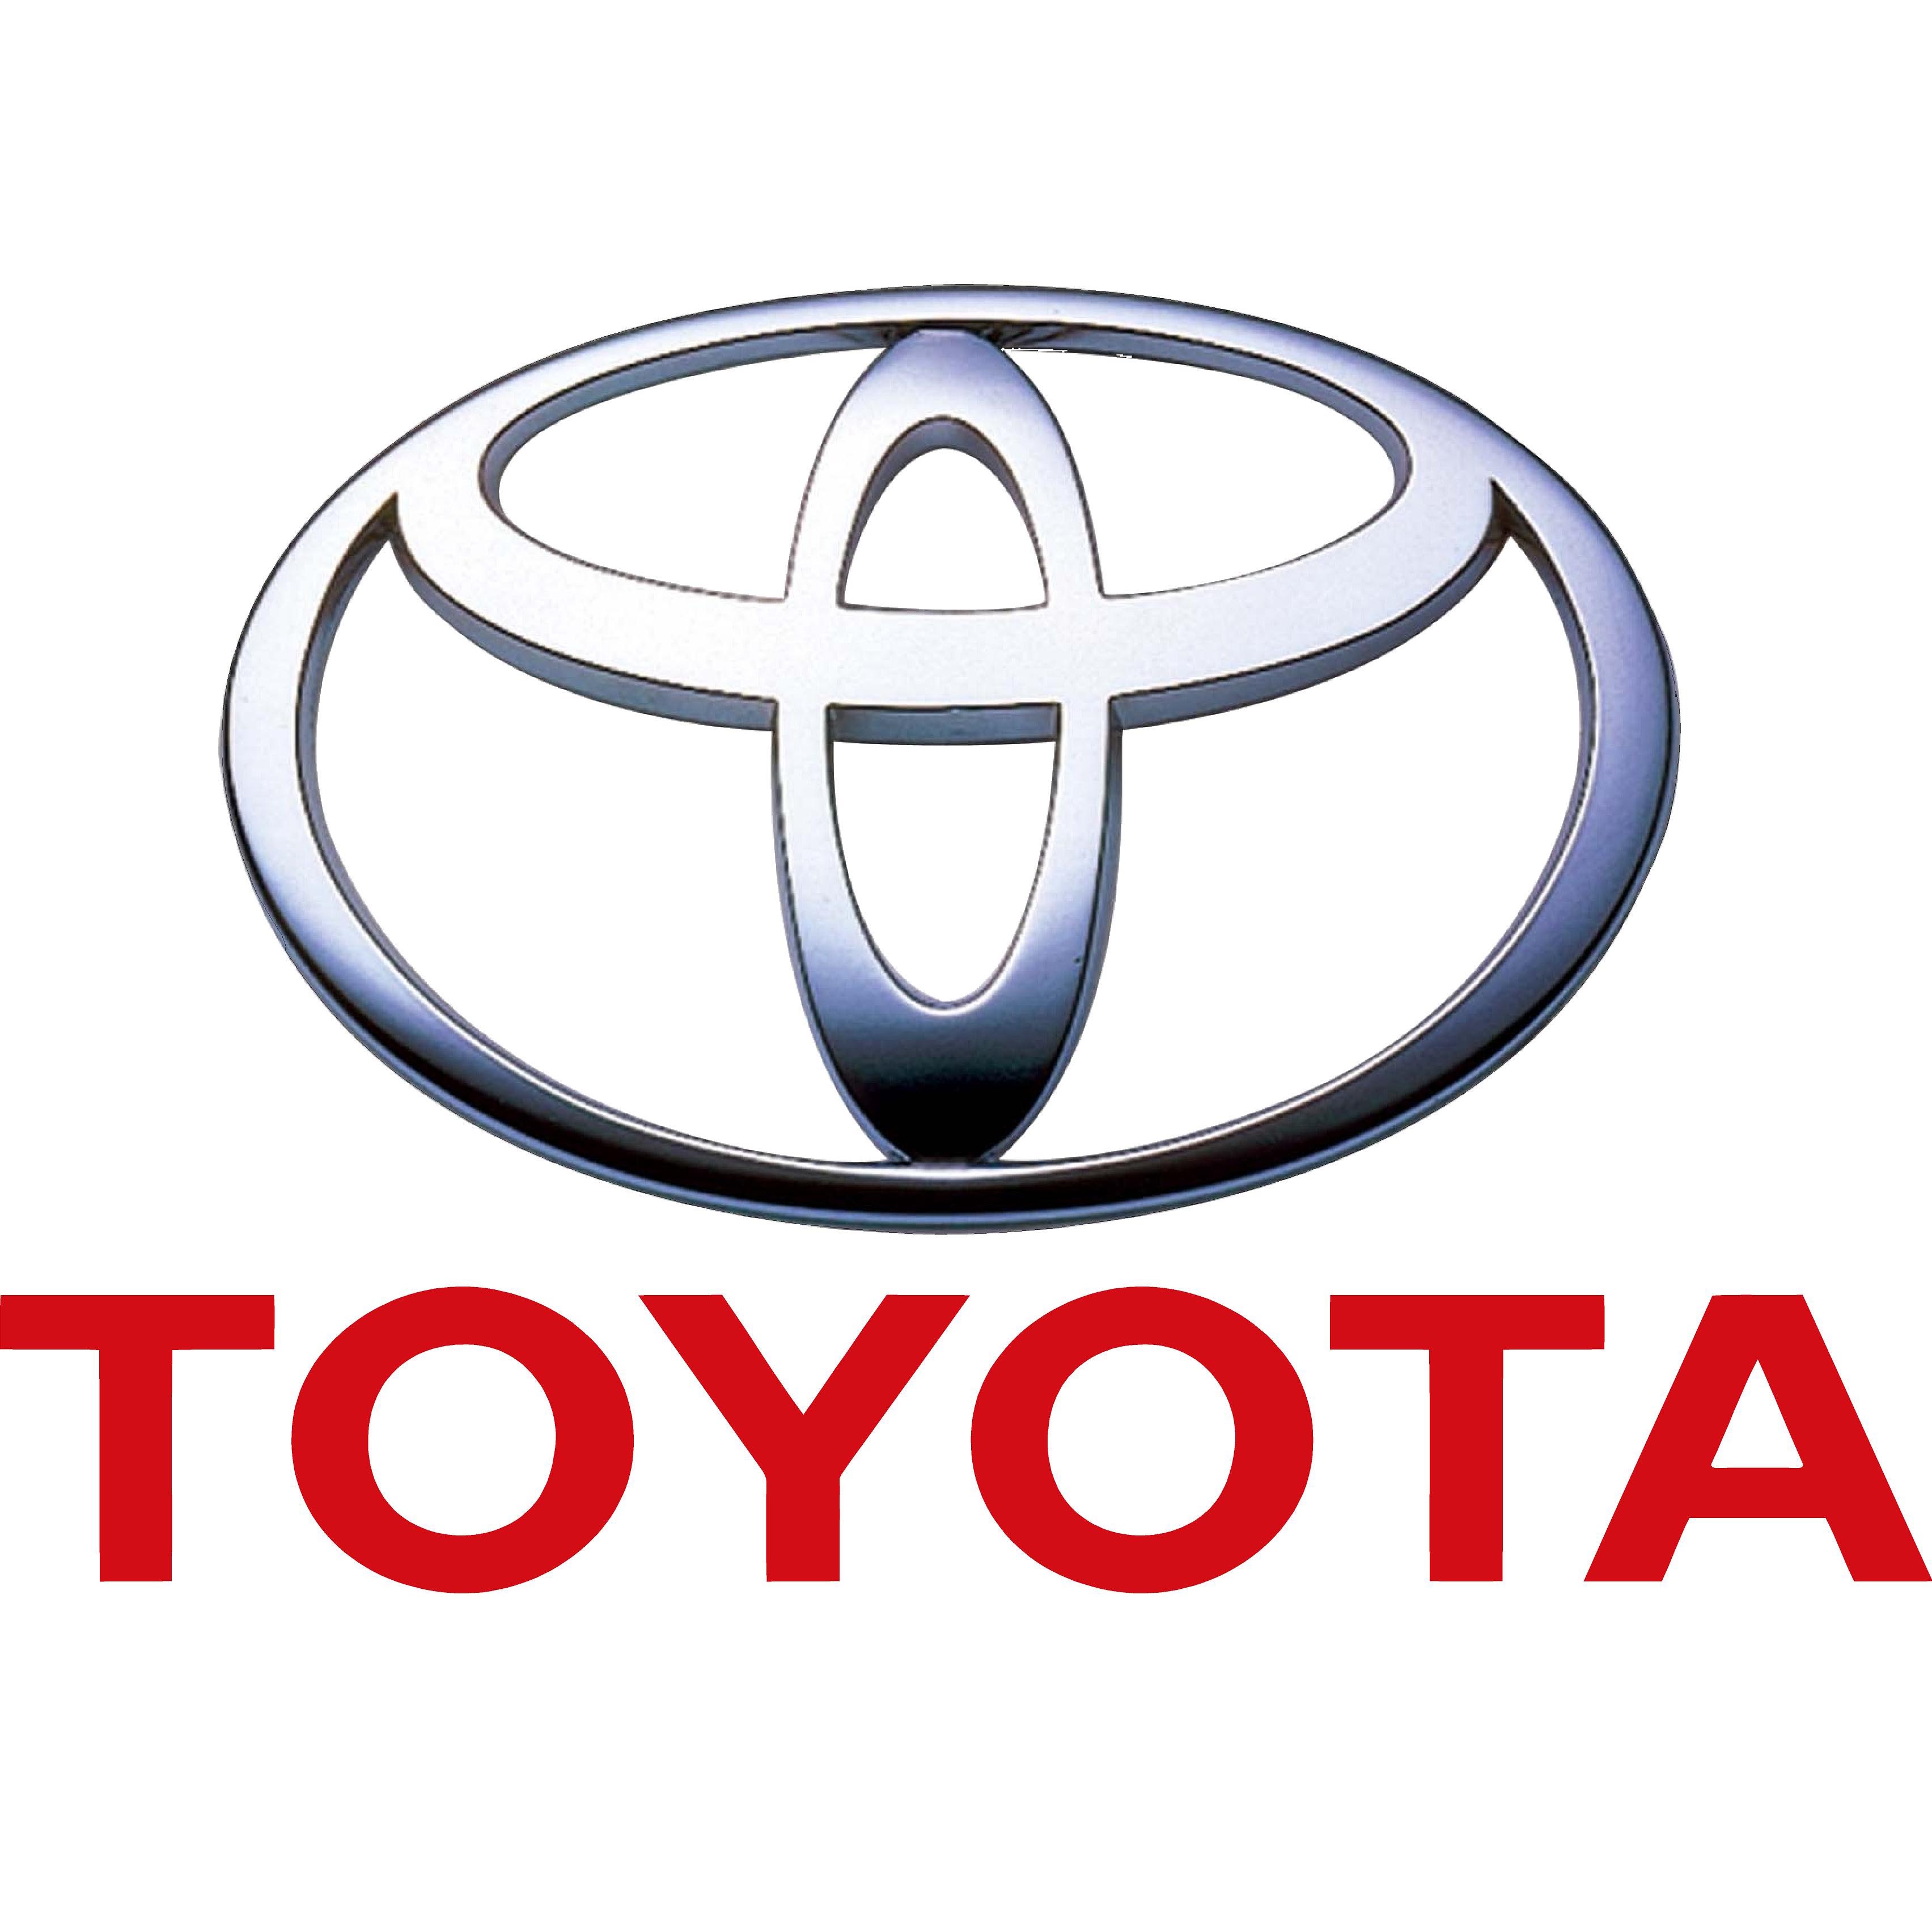 toyota-logo-toyota-car-symbol-meaning-and-history-car-brand-names